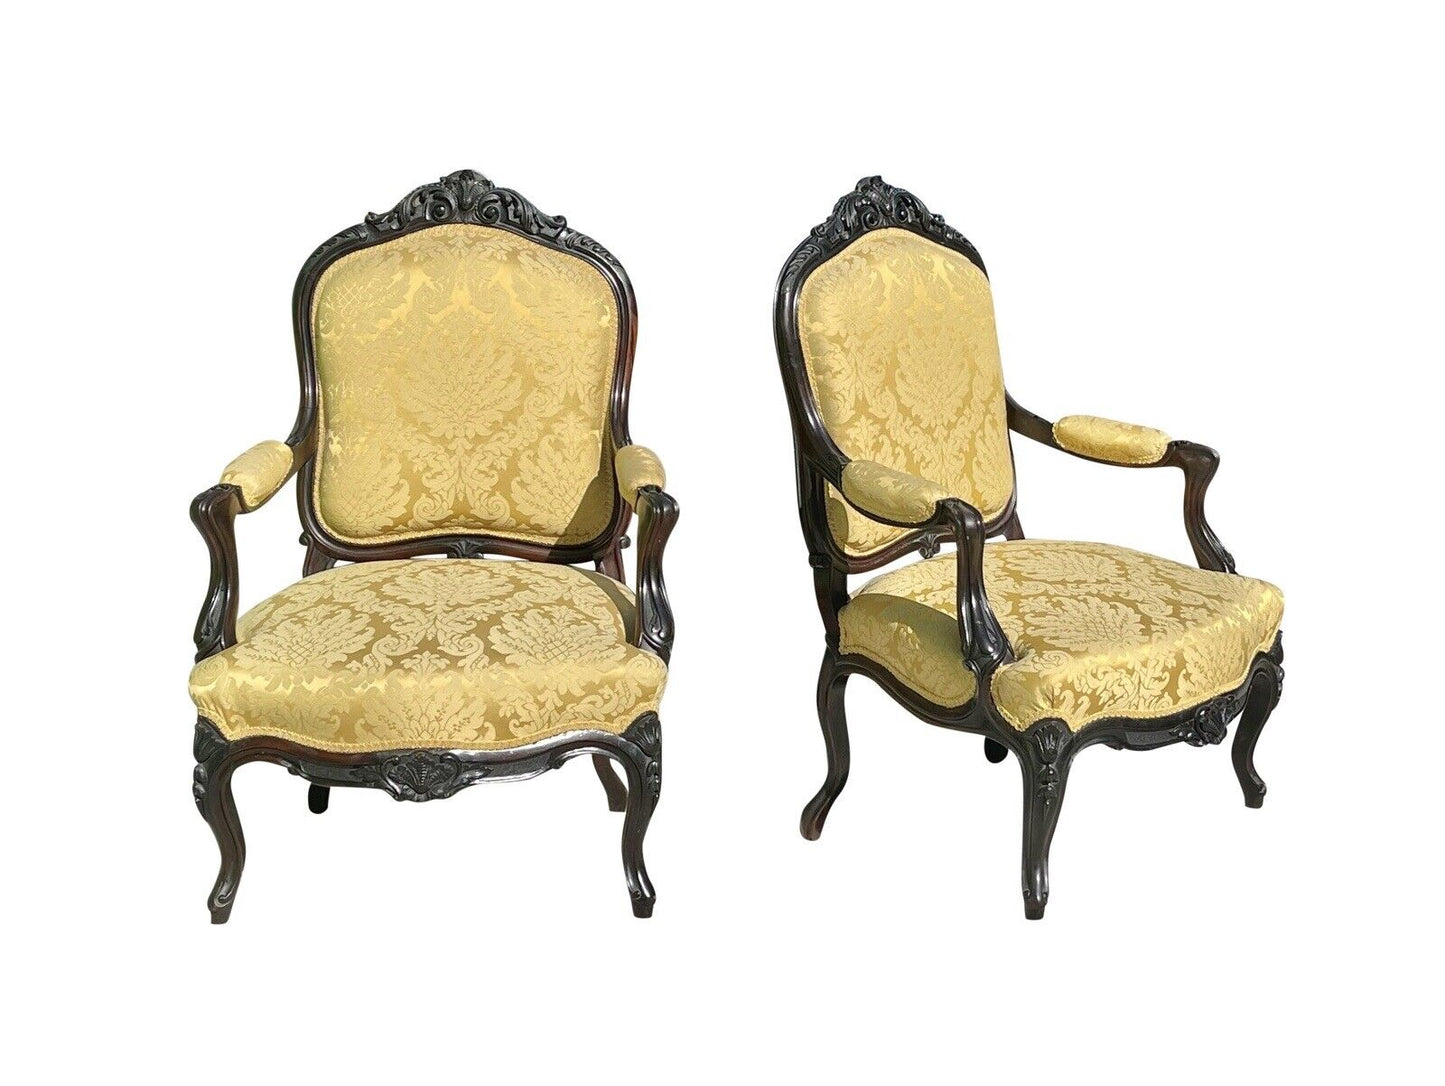 Pair of Louis Xiv Ebonized Rosewood Fauteuil a La Reine Arm Chairs in Satin Gold